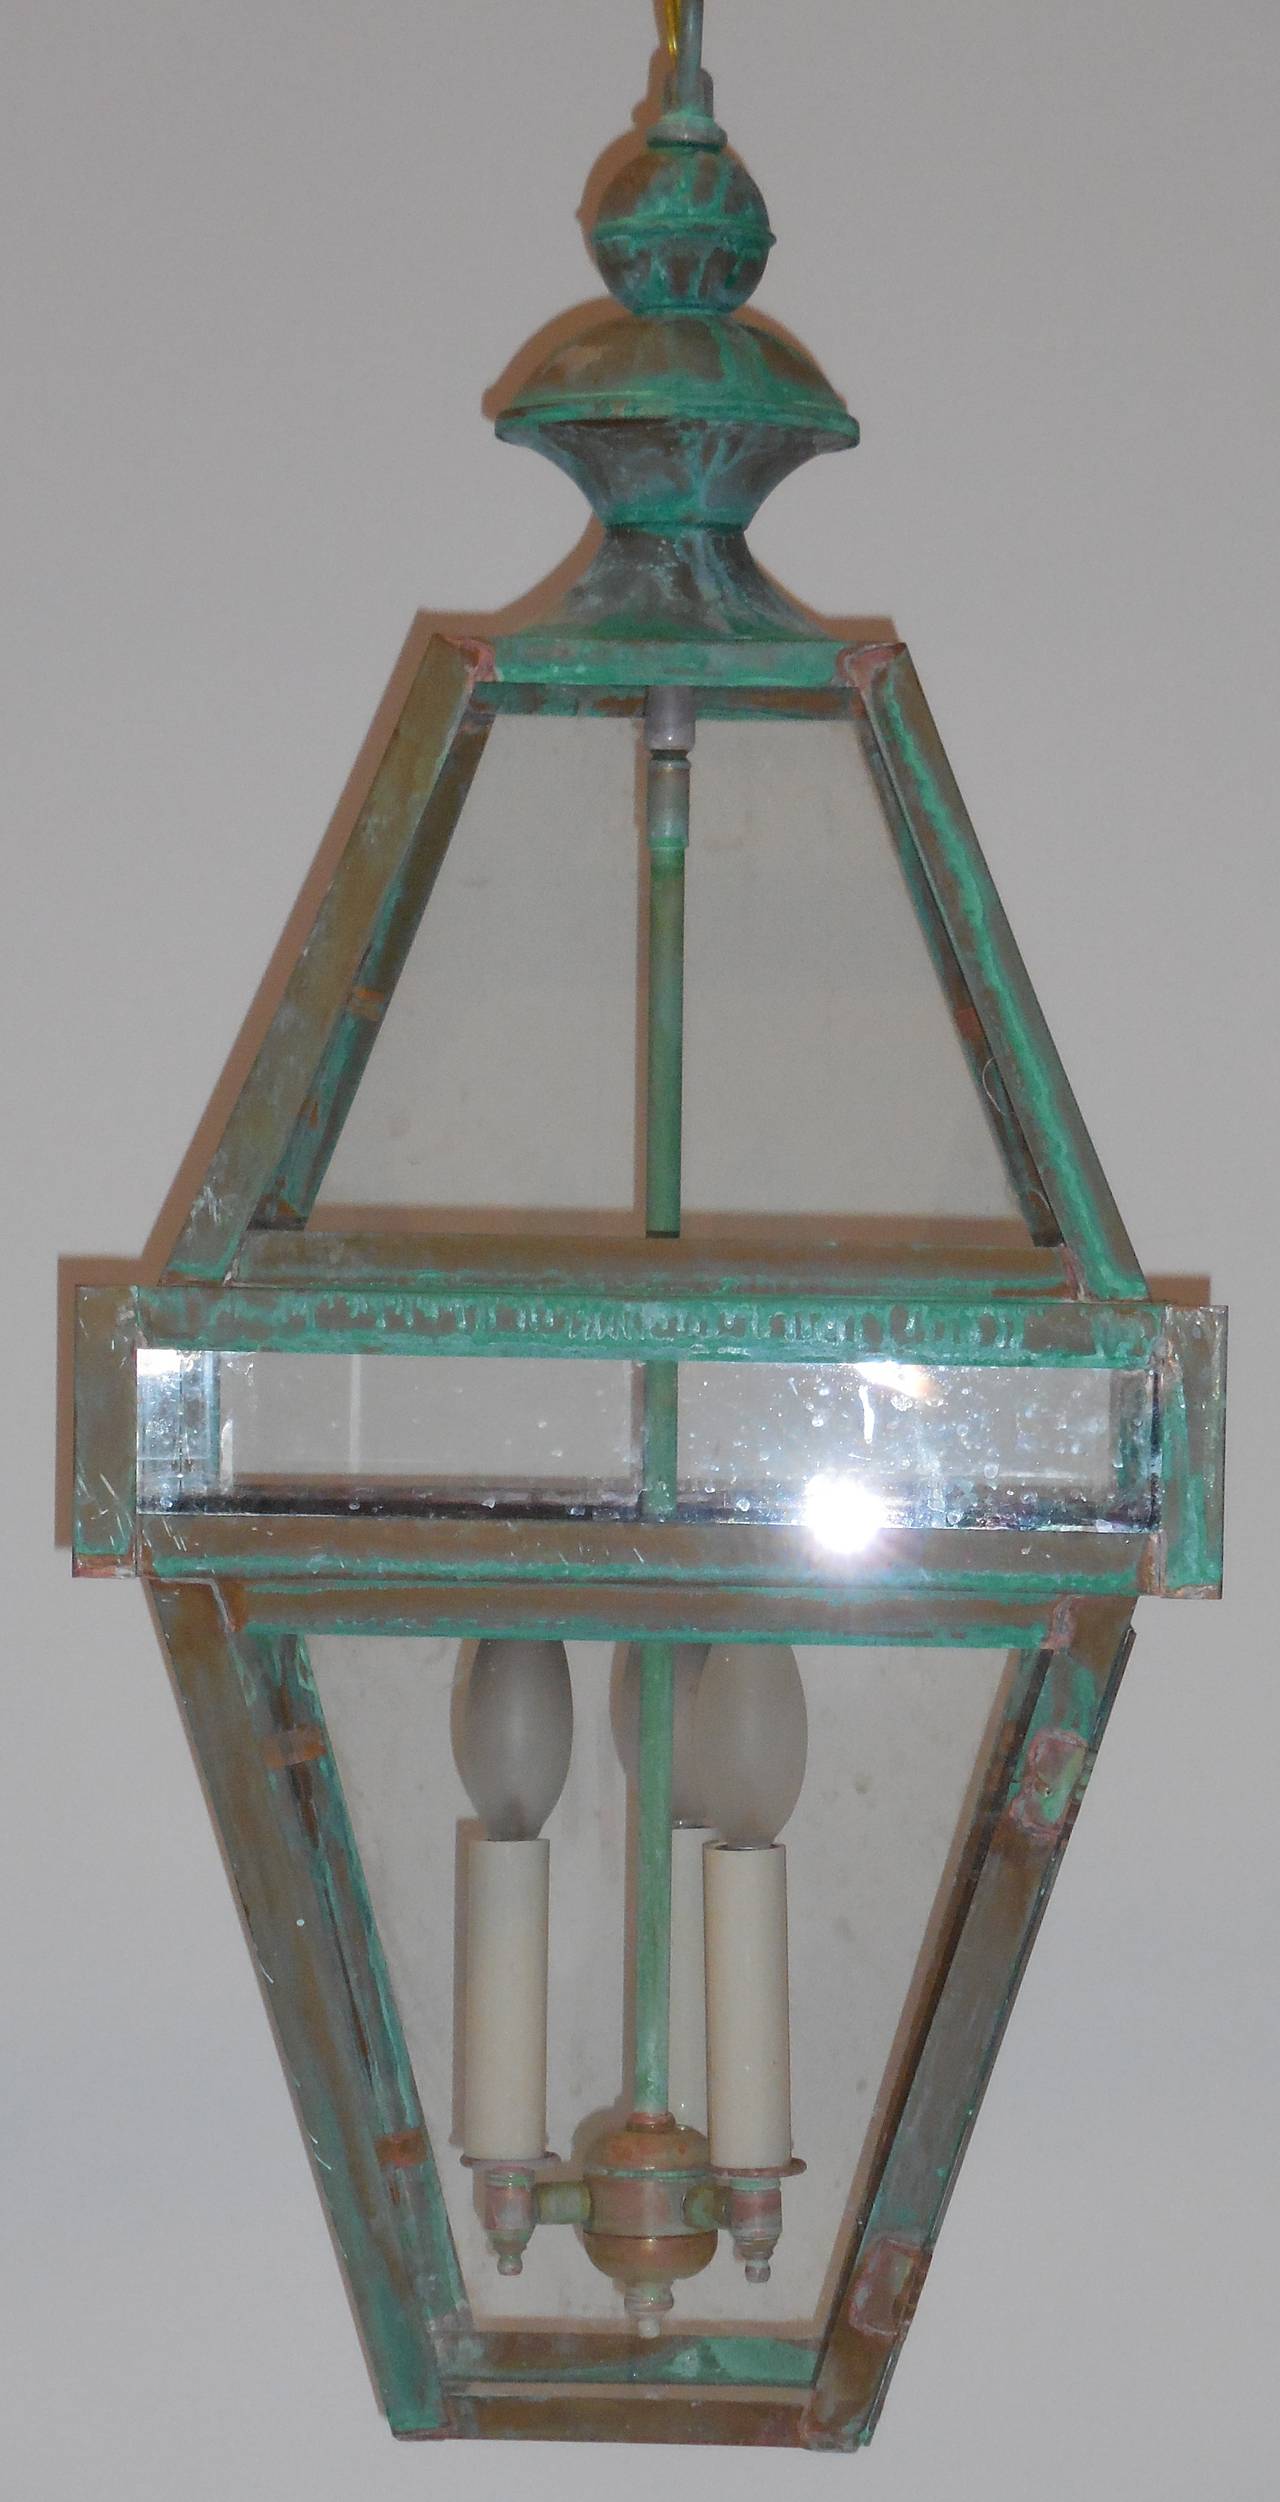 Four-Sided Architectural Hanging Lantern 3